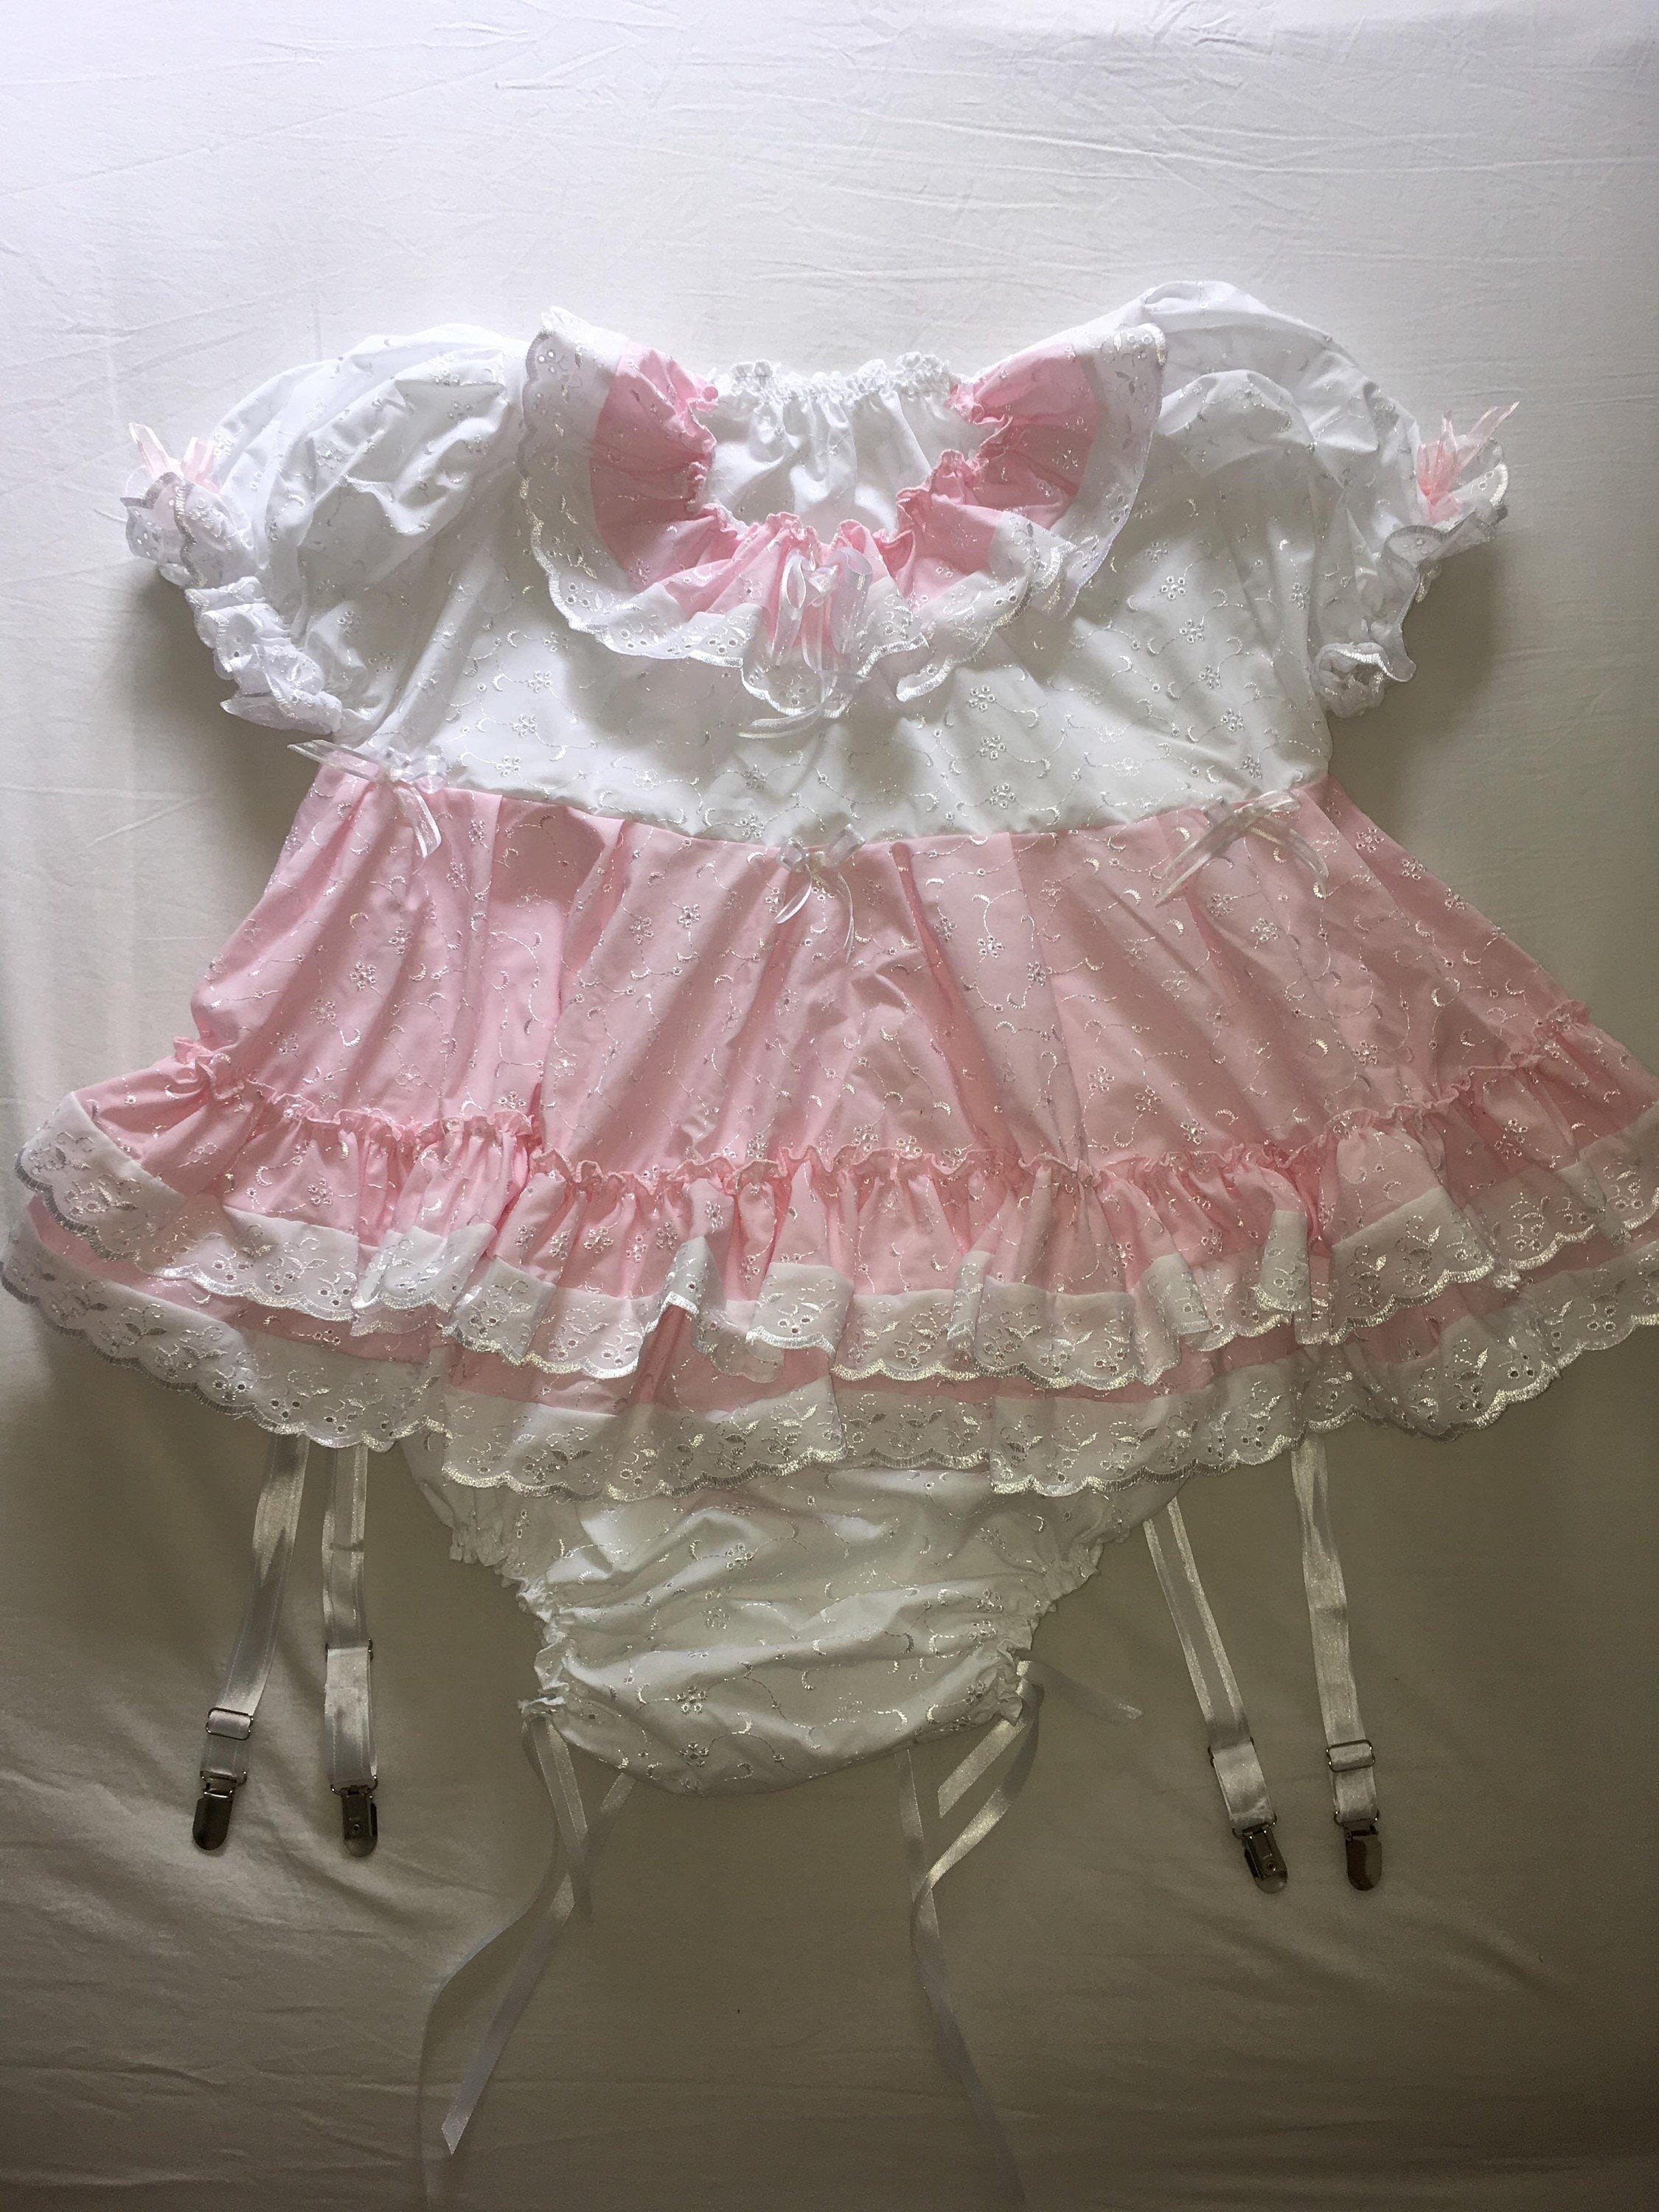 david westling share adult baby sissy dress photos